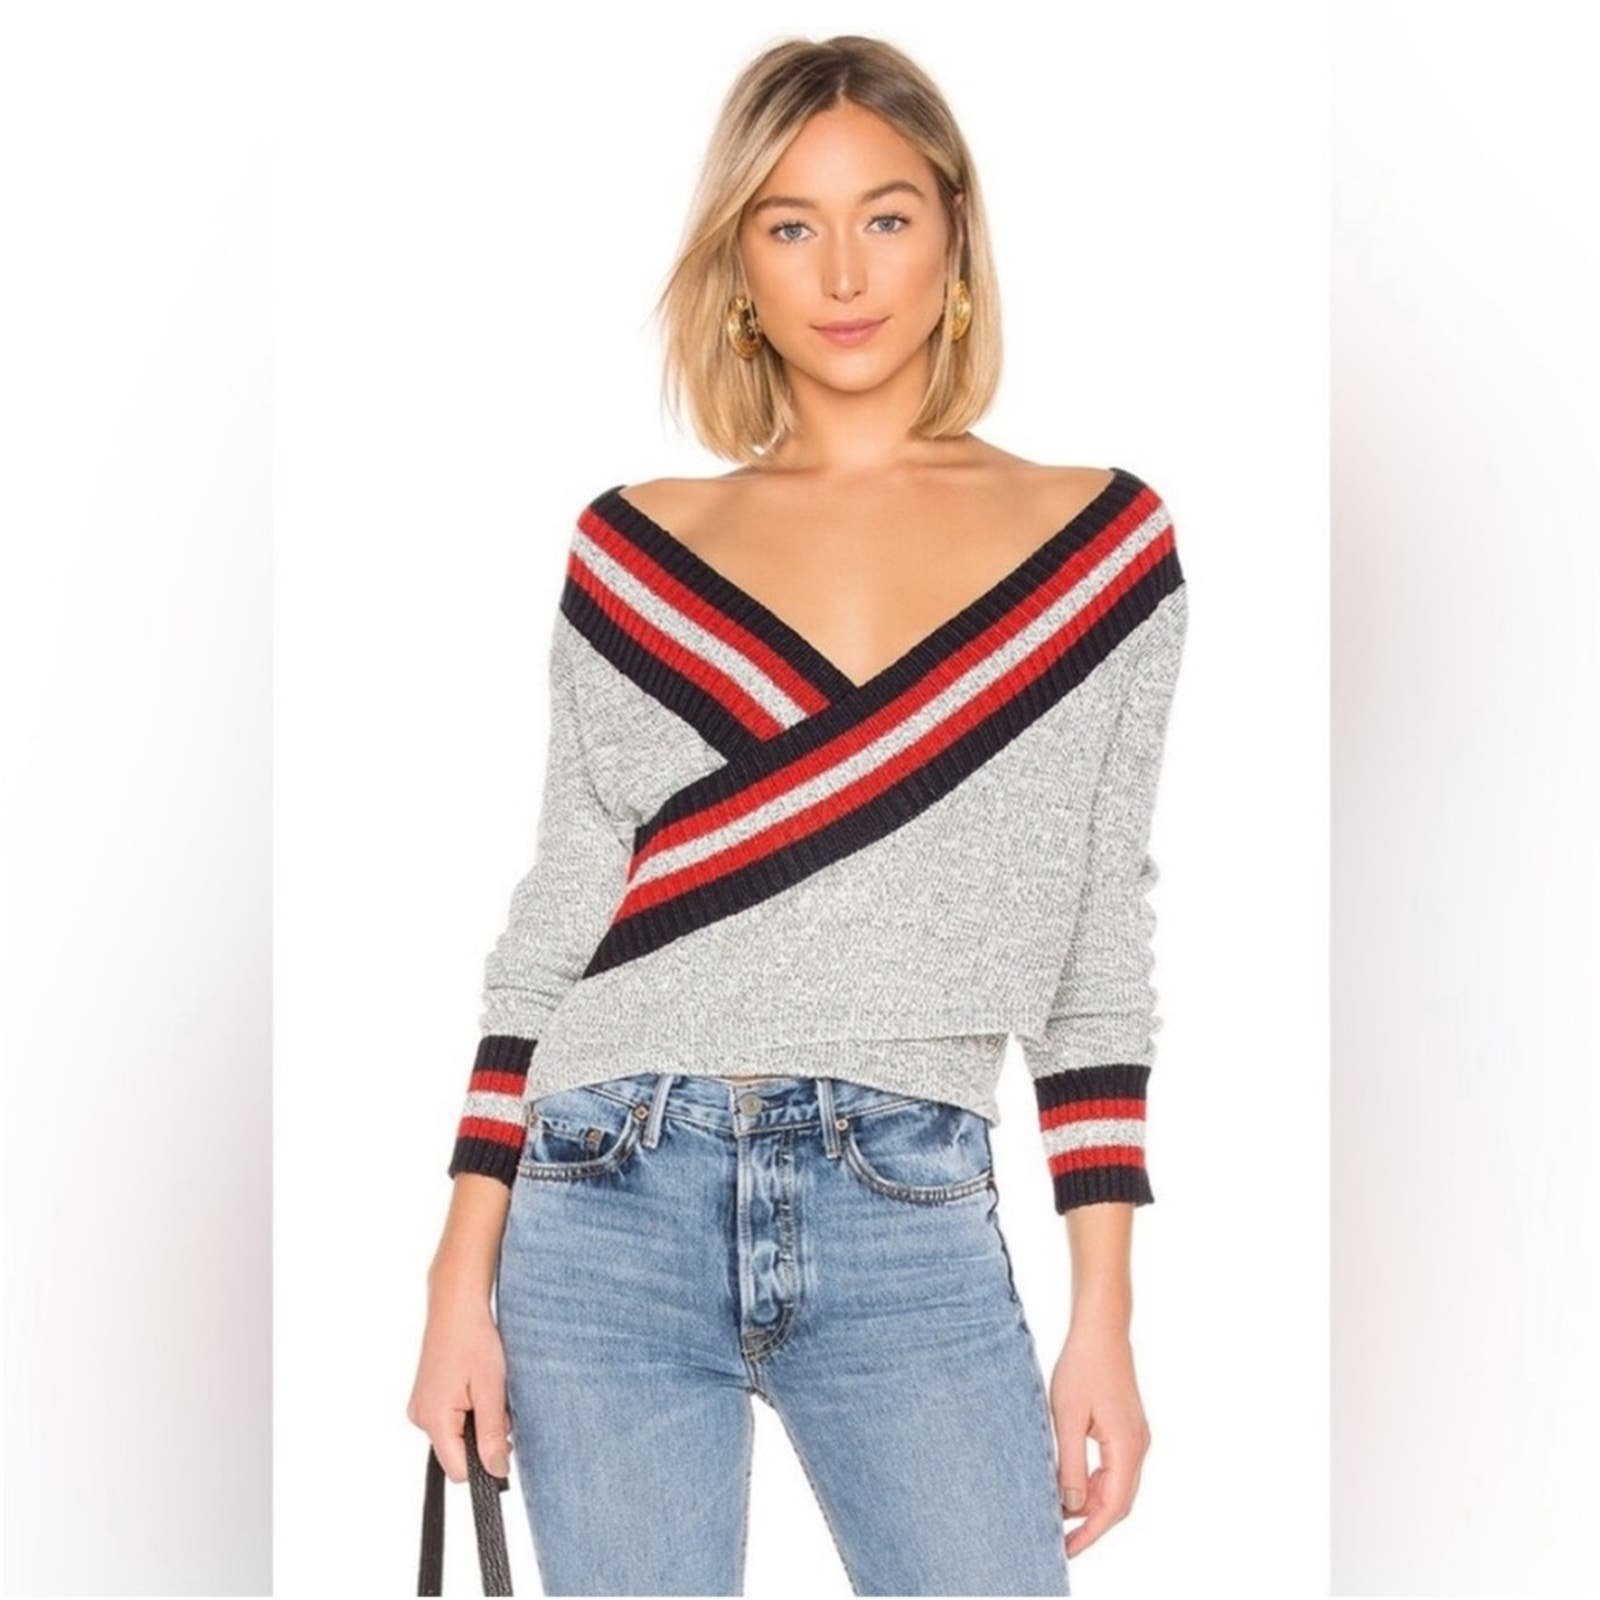 Affordable C/MEO Collective Crossover Knit Sweater Large Racing Stripe Ppl14yy3G best sale